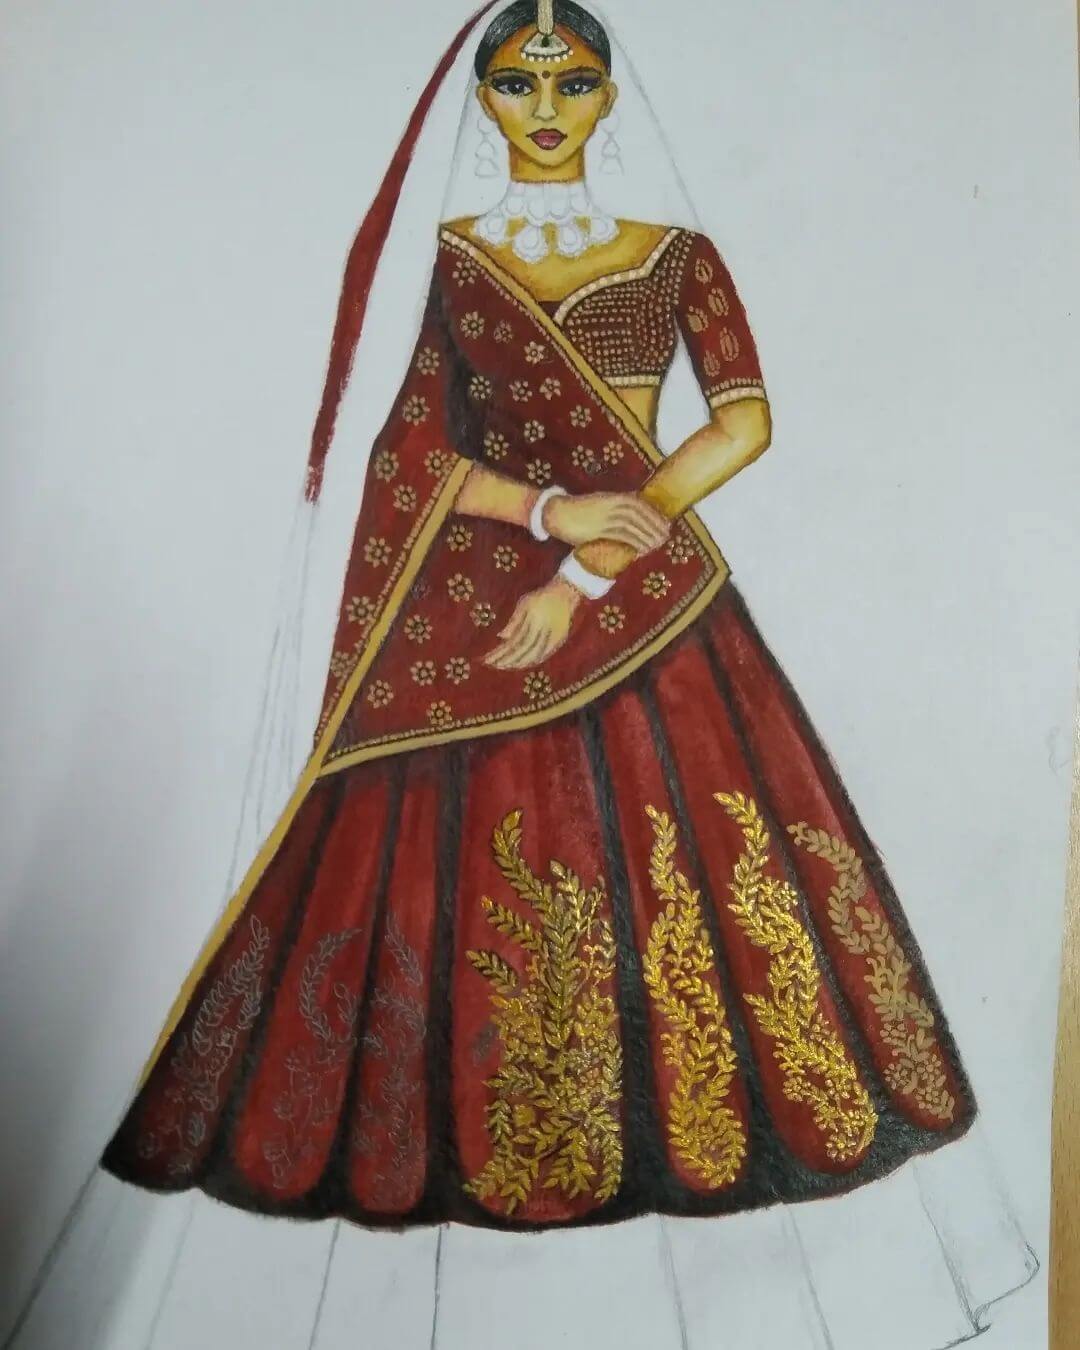 10. Fashion drawing of a woman wearing a red detailed sari drawn in coloured pencils.